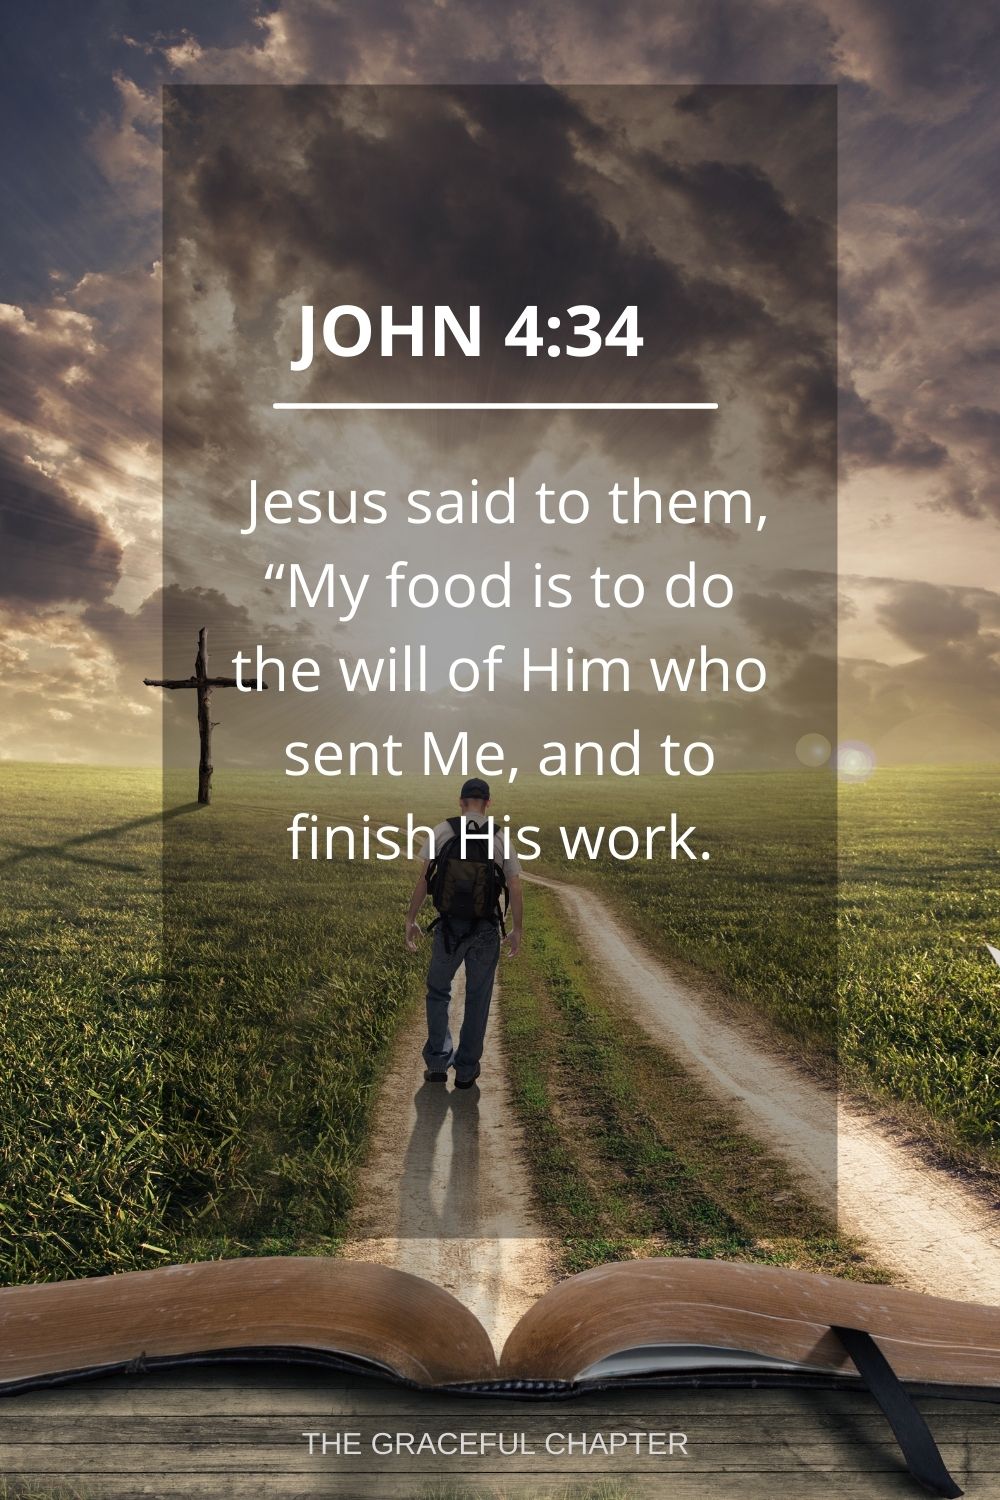 Jesus said to them, “My food is to do the will of Him who sent Me, and to finish His work. John 4:34